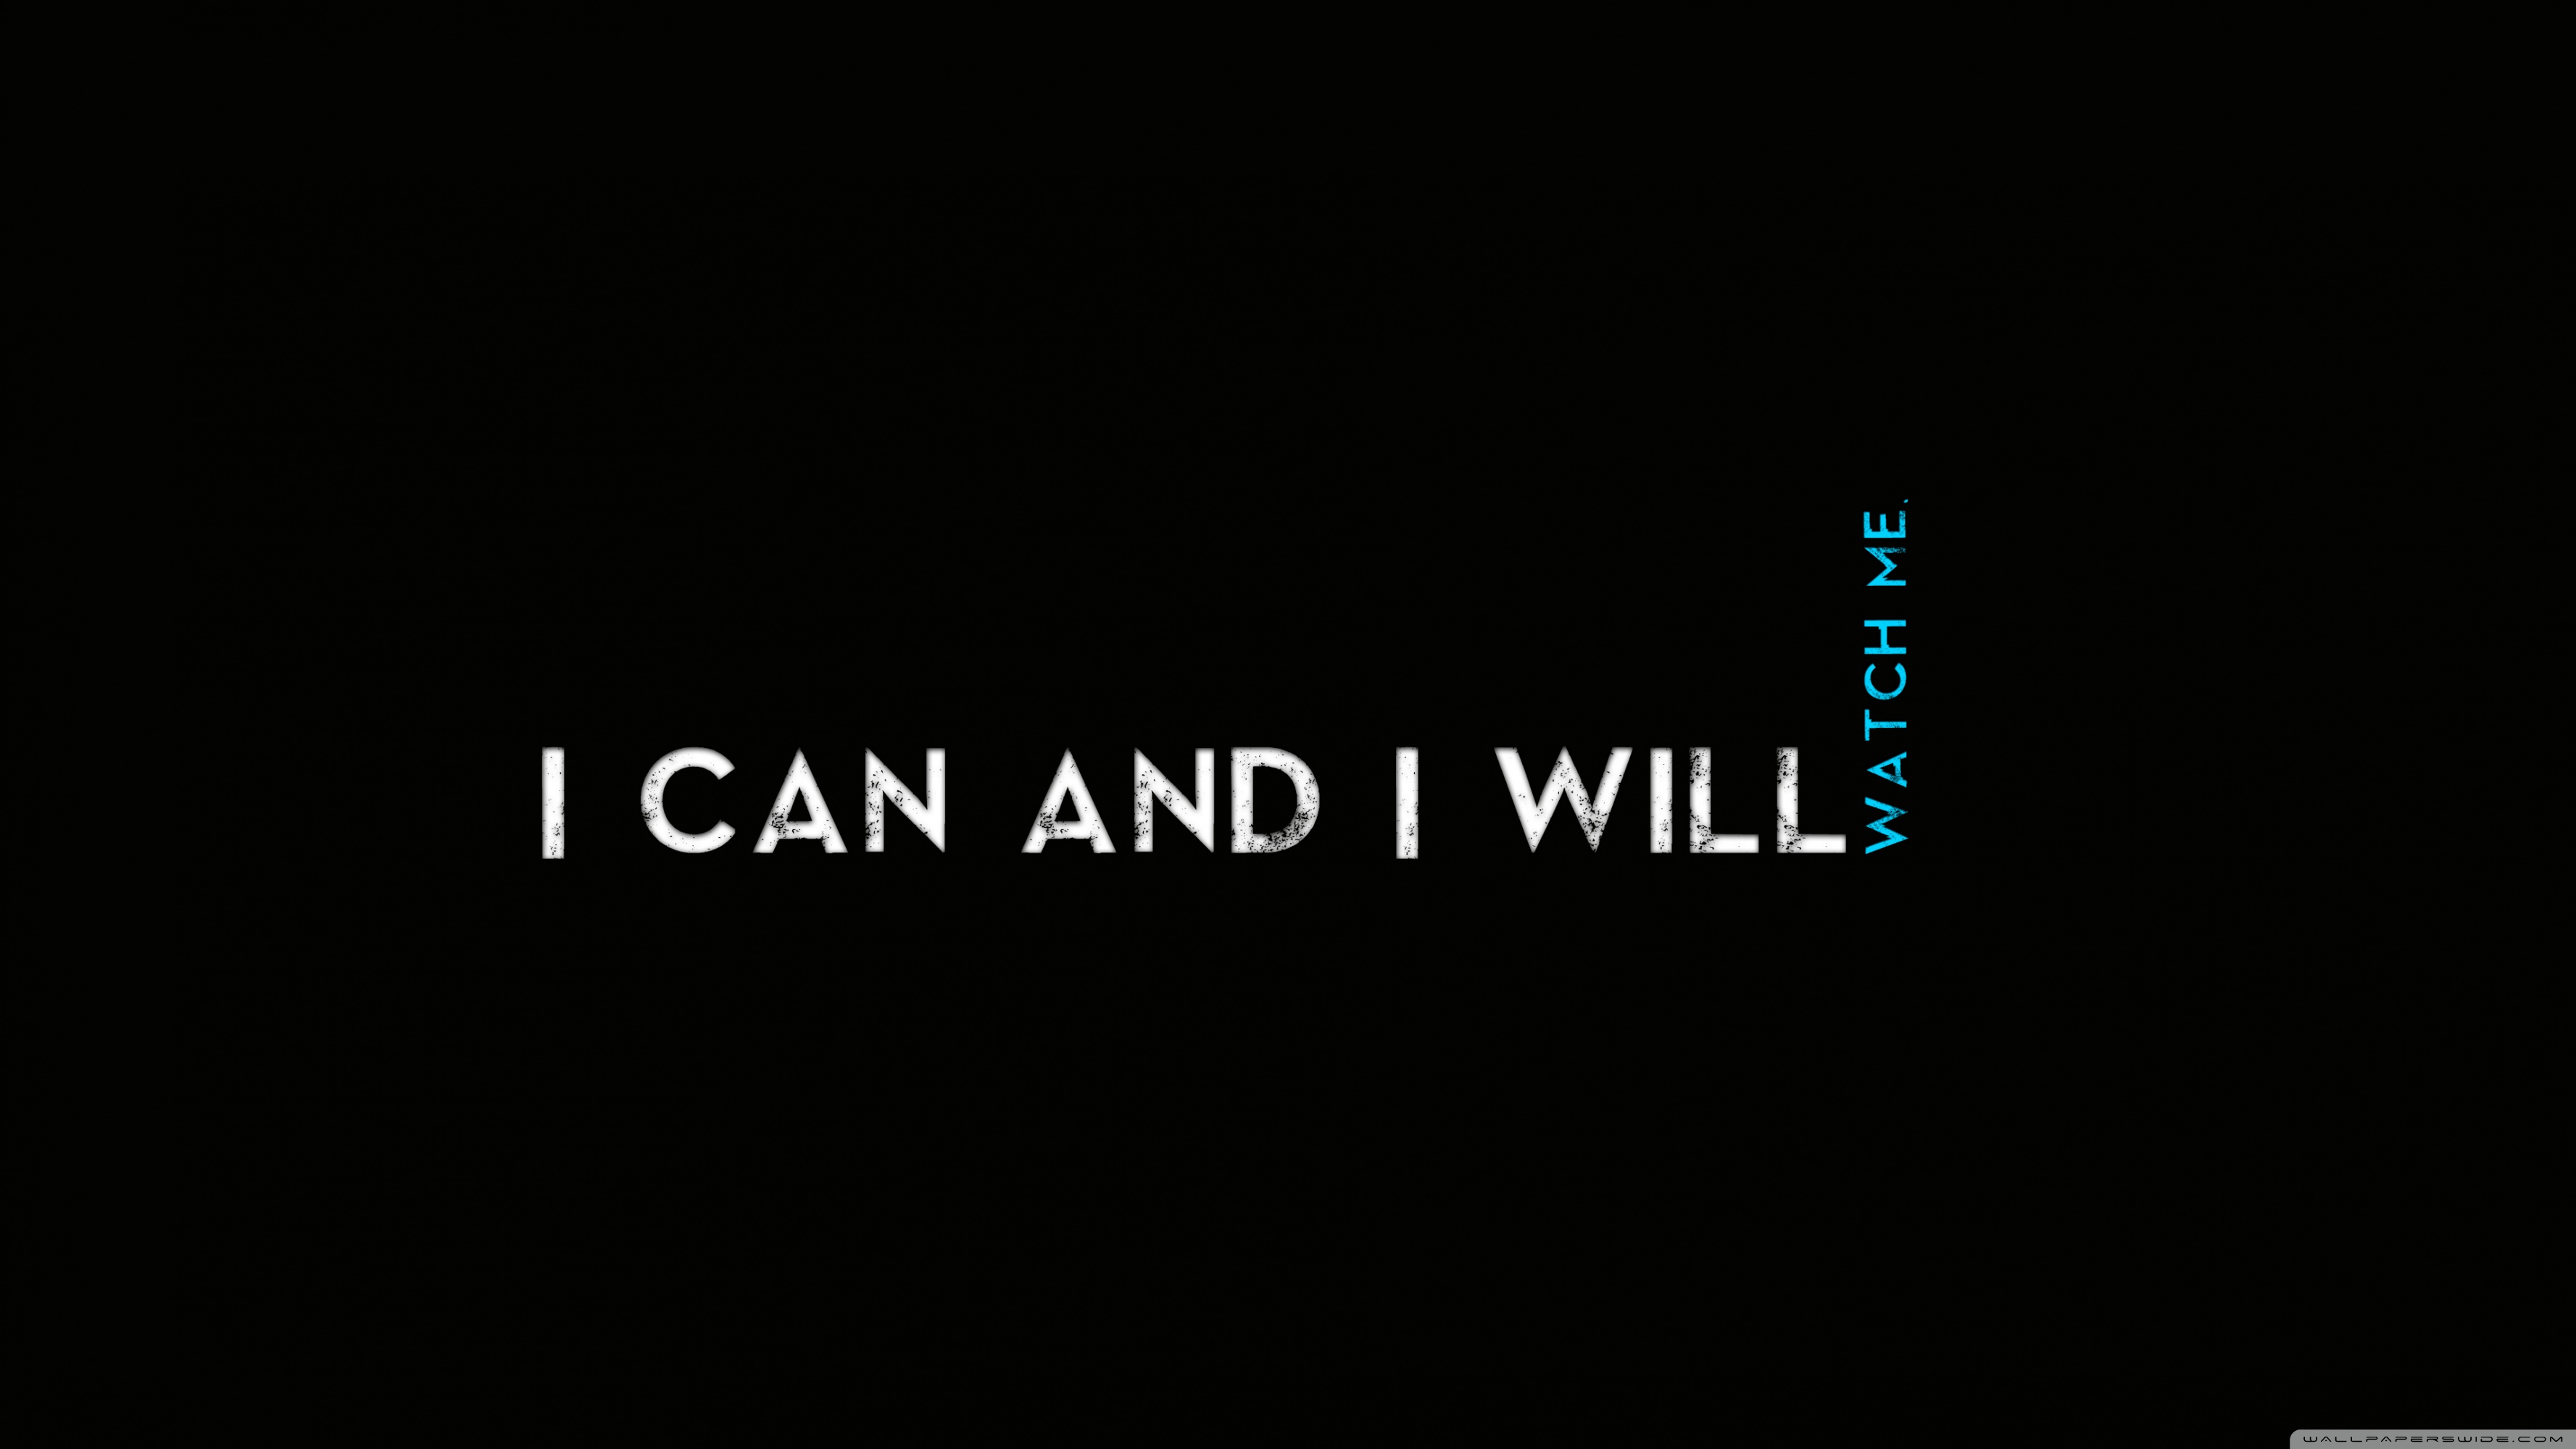 Quotes I CaN AnD I WiLl Ultra HD Desktop Background Wallpaper for 4K UHD TV  : Widescreen & UltraWide Desktop & Laptop : Multi Display, Dual Monitor :  Tablet : Smartphone